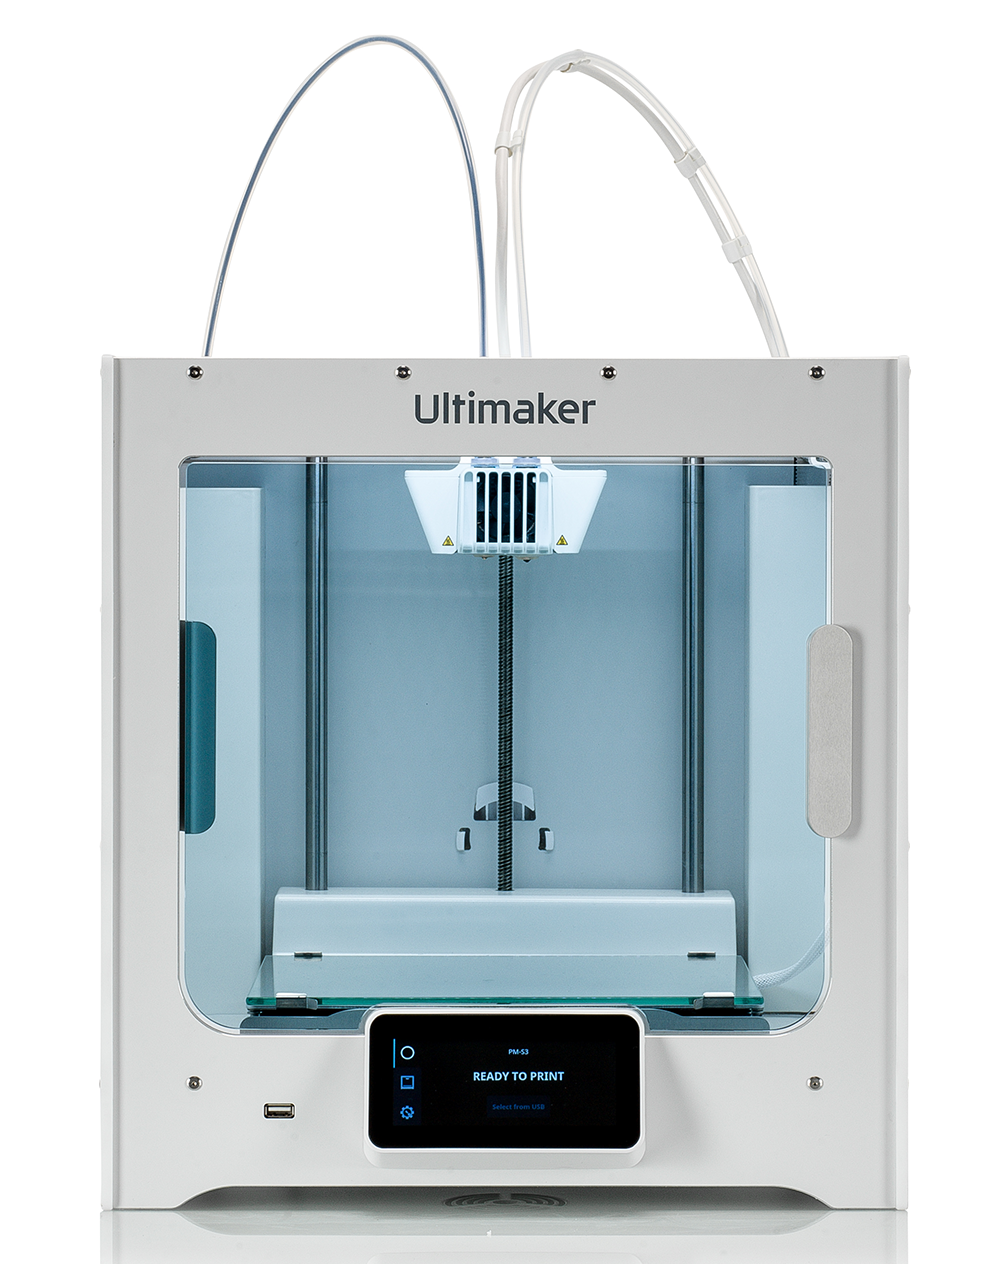 Taking a Closer Look at the Ultimaker S3 Printer